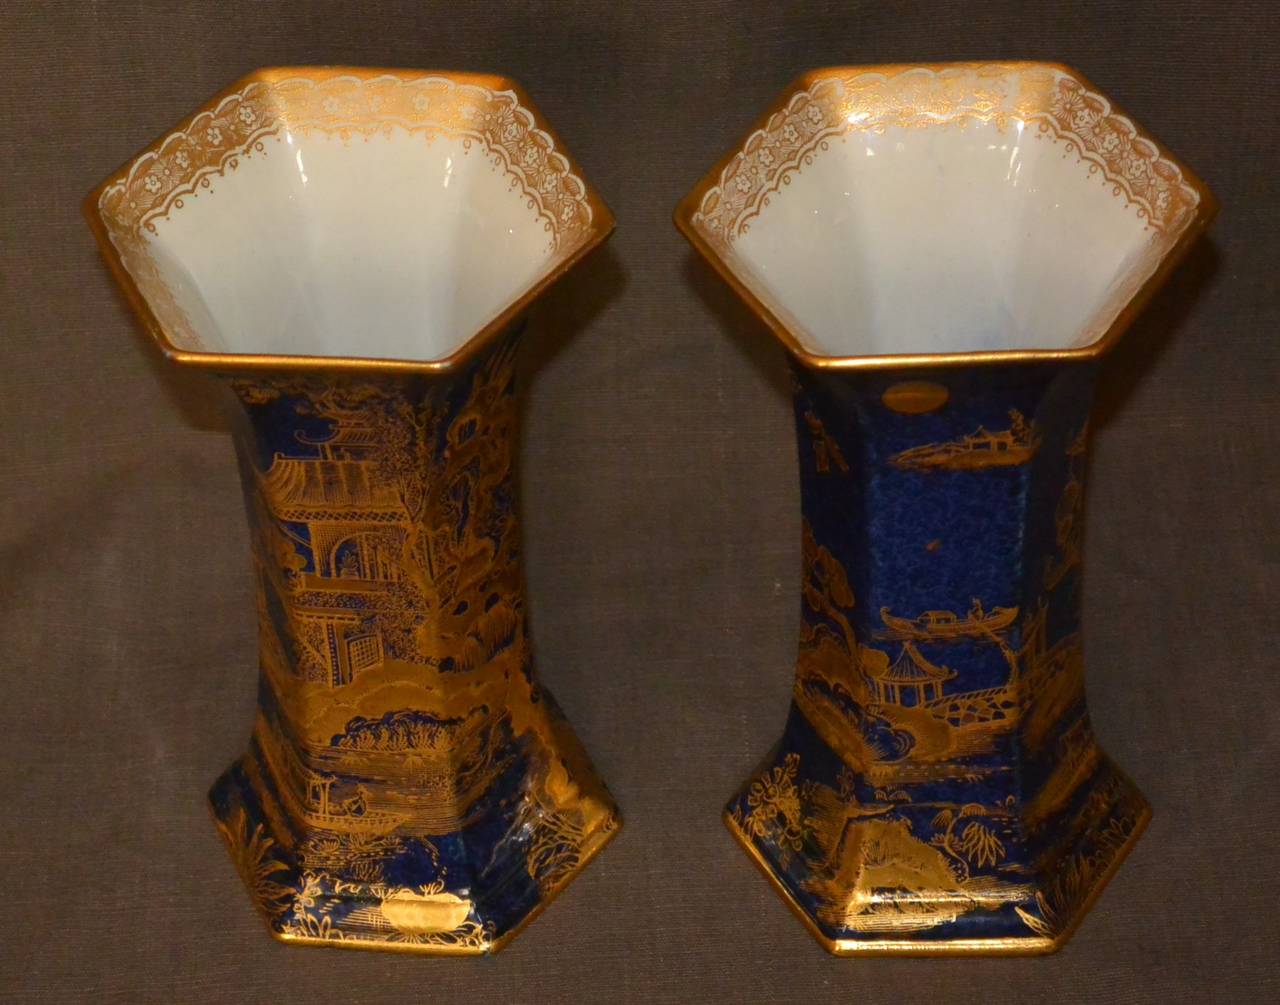 20th Century Pair of Hexagonal Chinoiserie Blue and Gold Vases